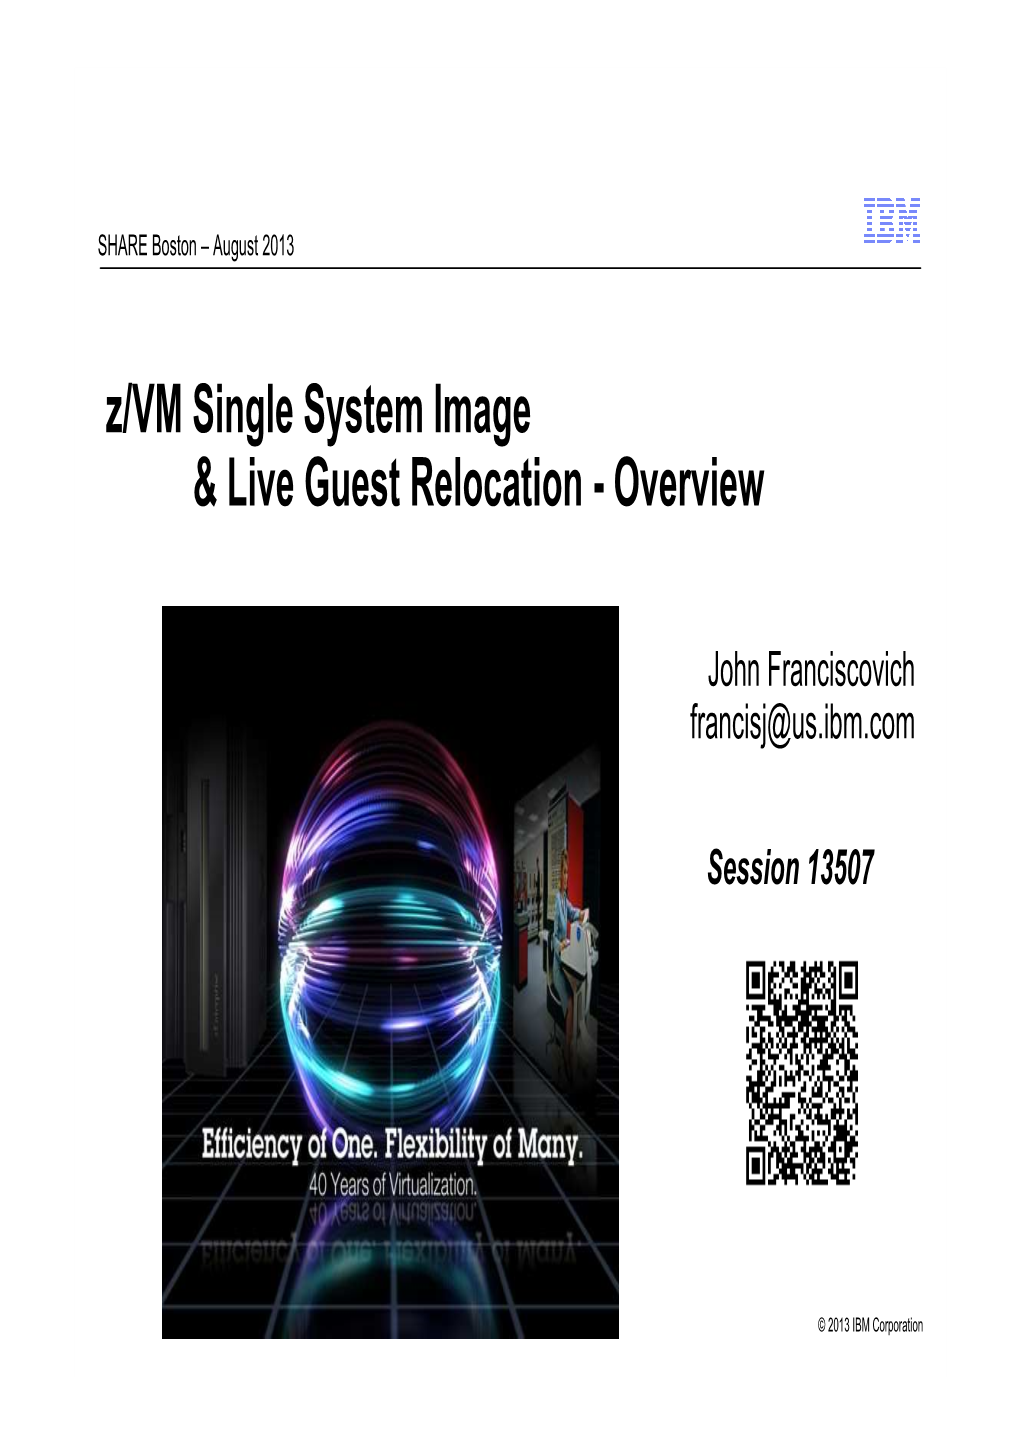 Z/VM Single System Image and Live Guest Relocation Overview Trademarks